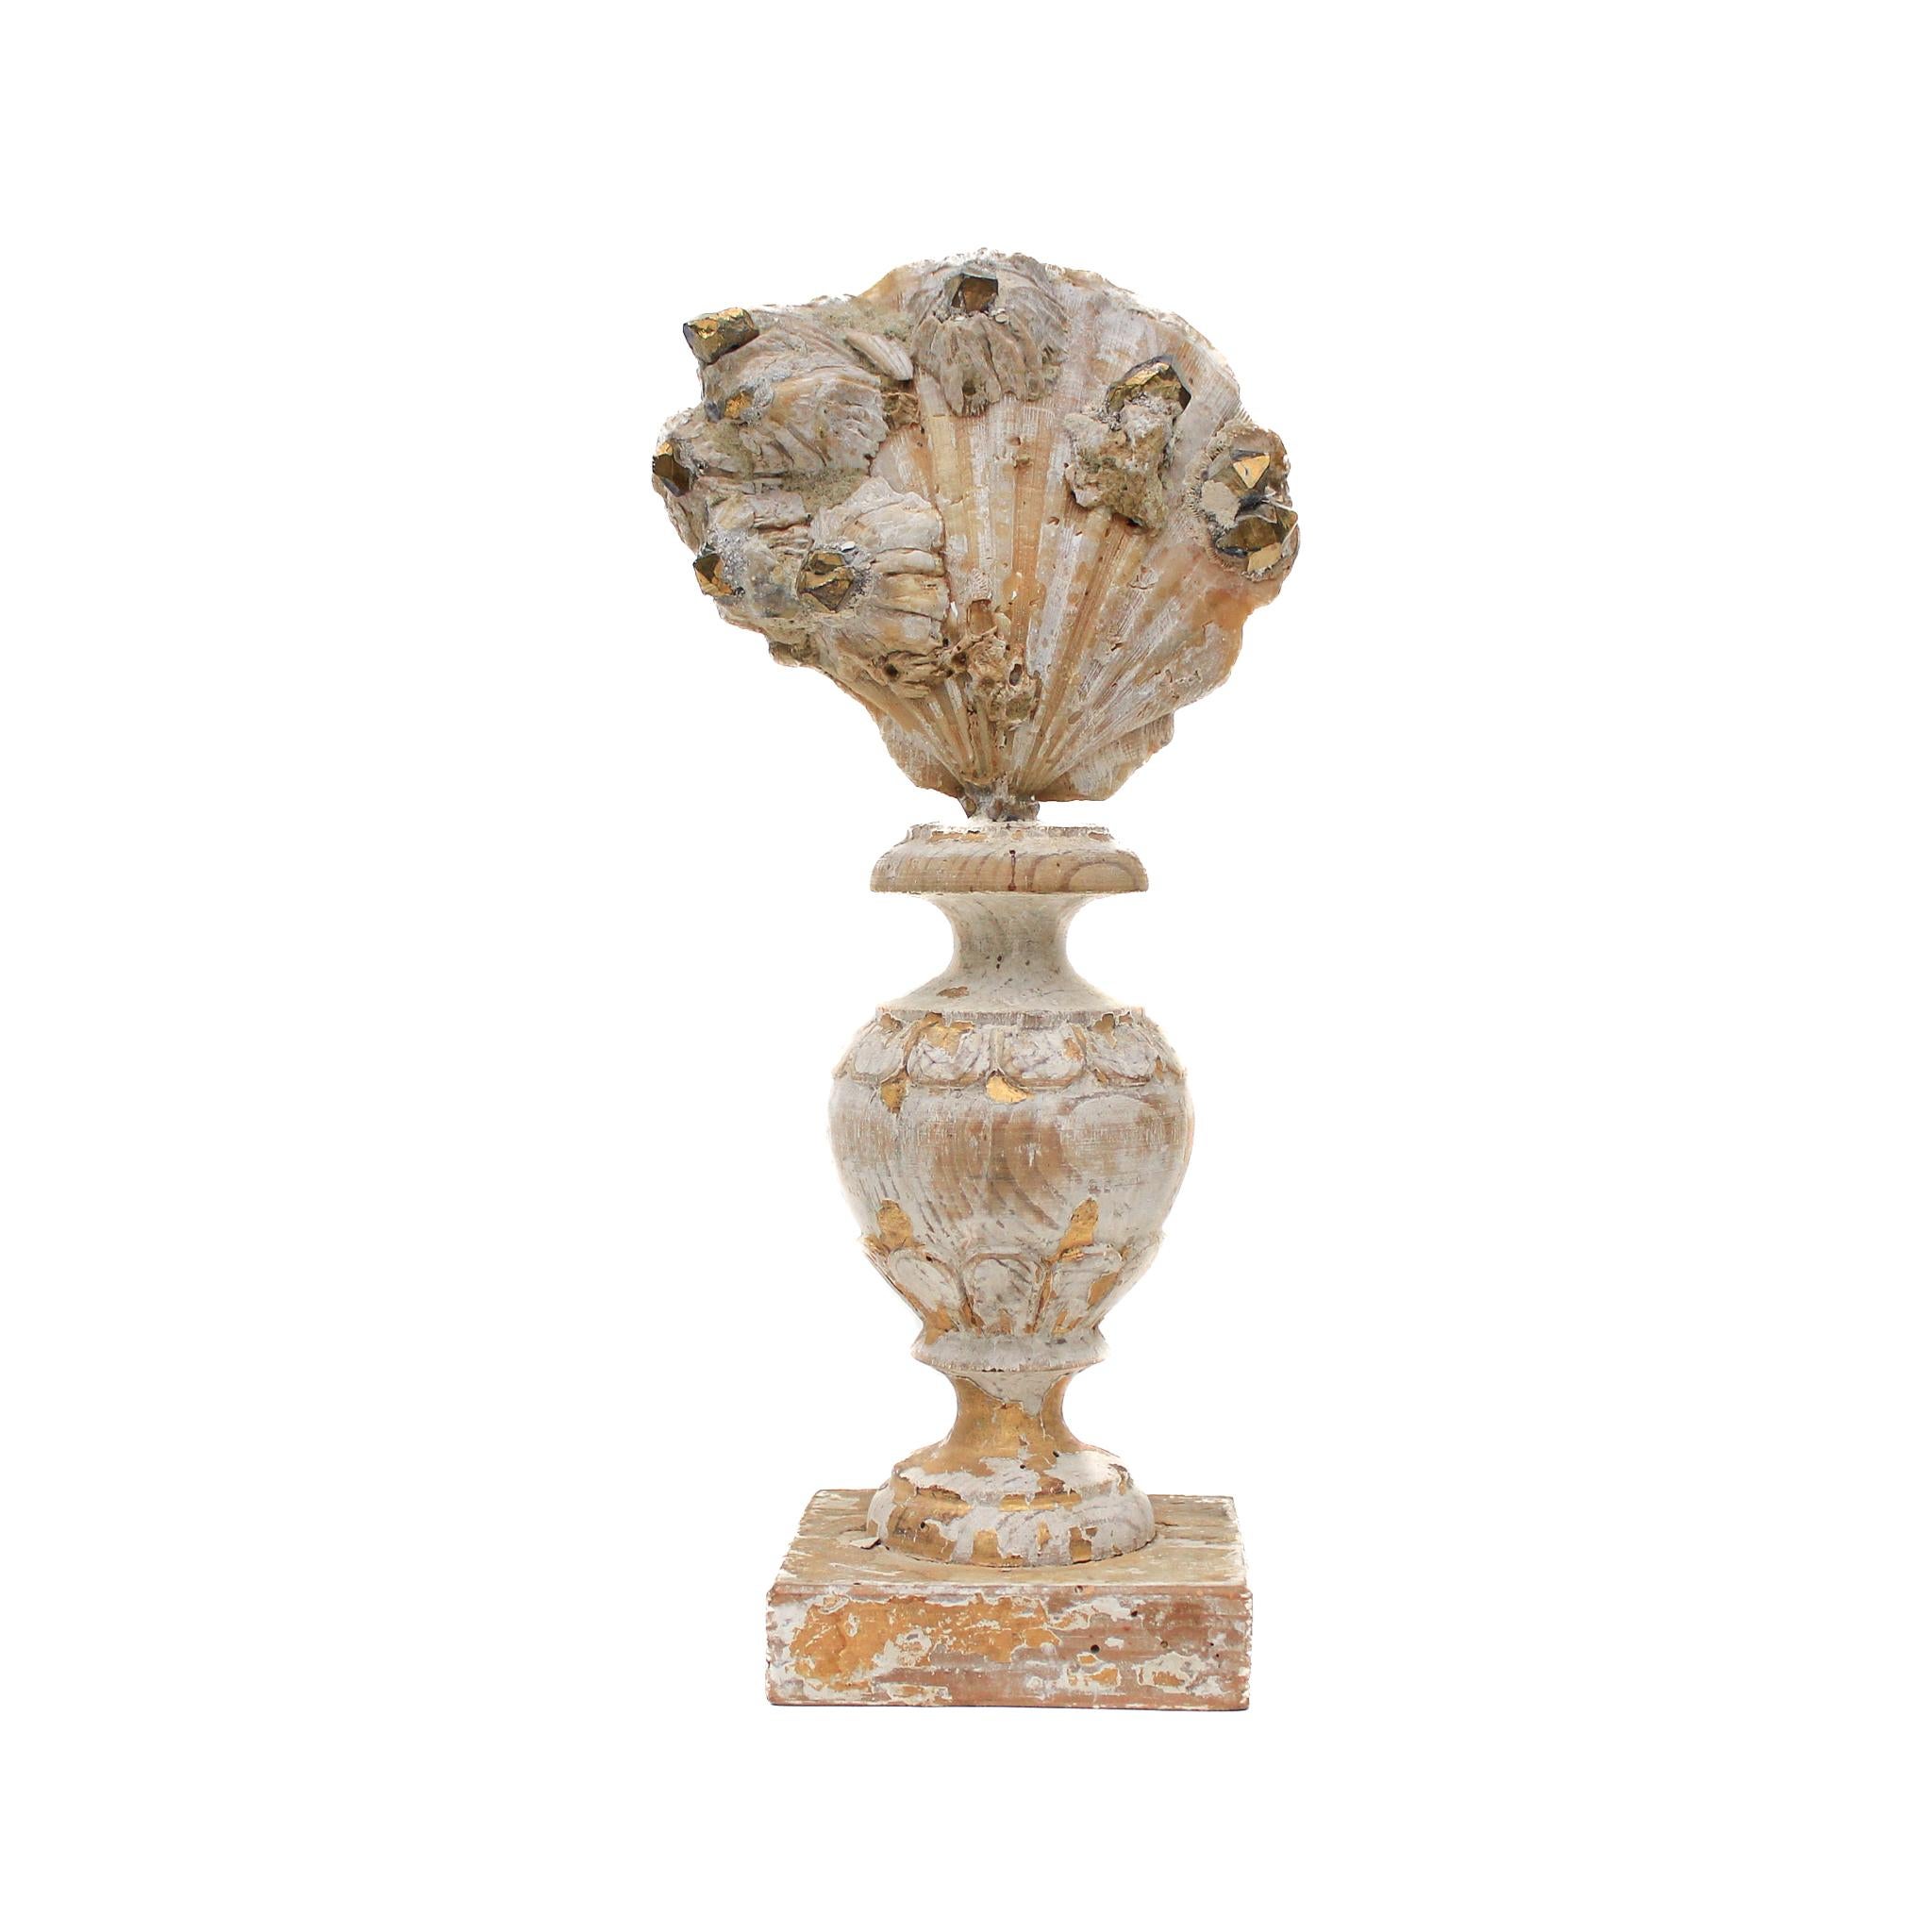 17th century Italian vase with a chesapecten shell & gold-plated crystal points.

This fragment is from a church in Florence. It was found and saved from the historic flooding of the Arno River in 1966.

The piece has been naturally distressed